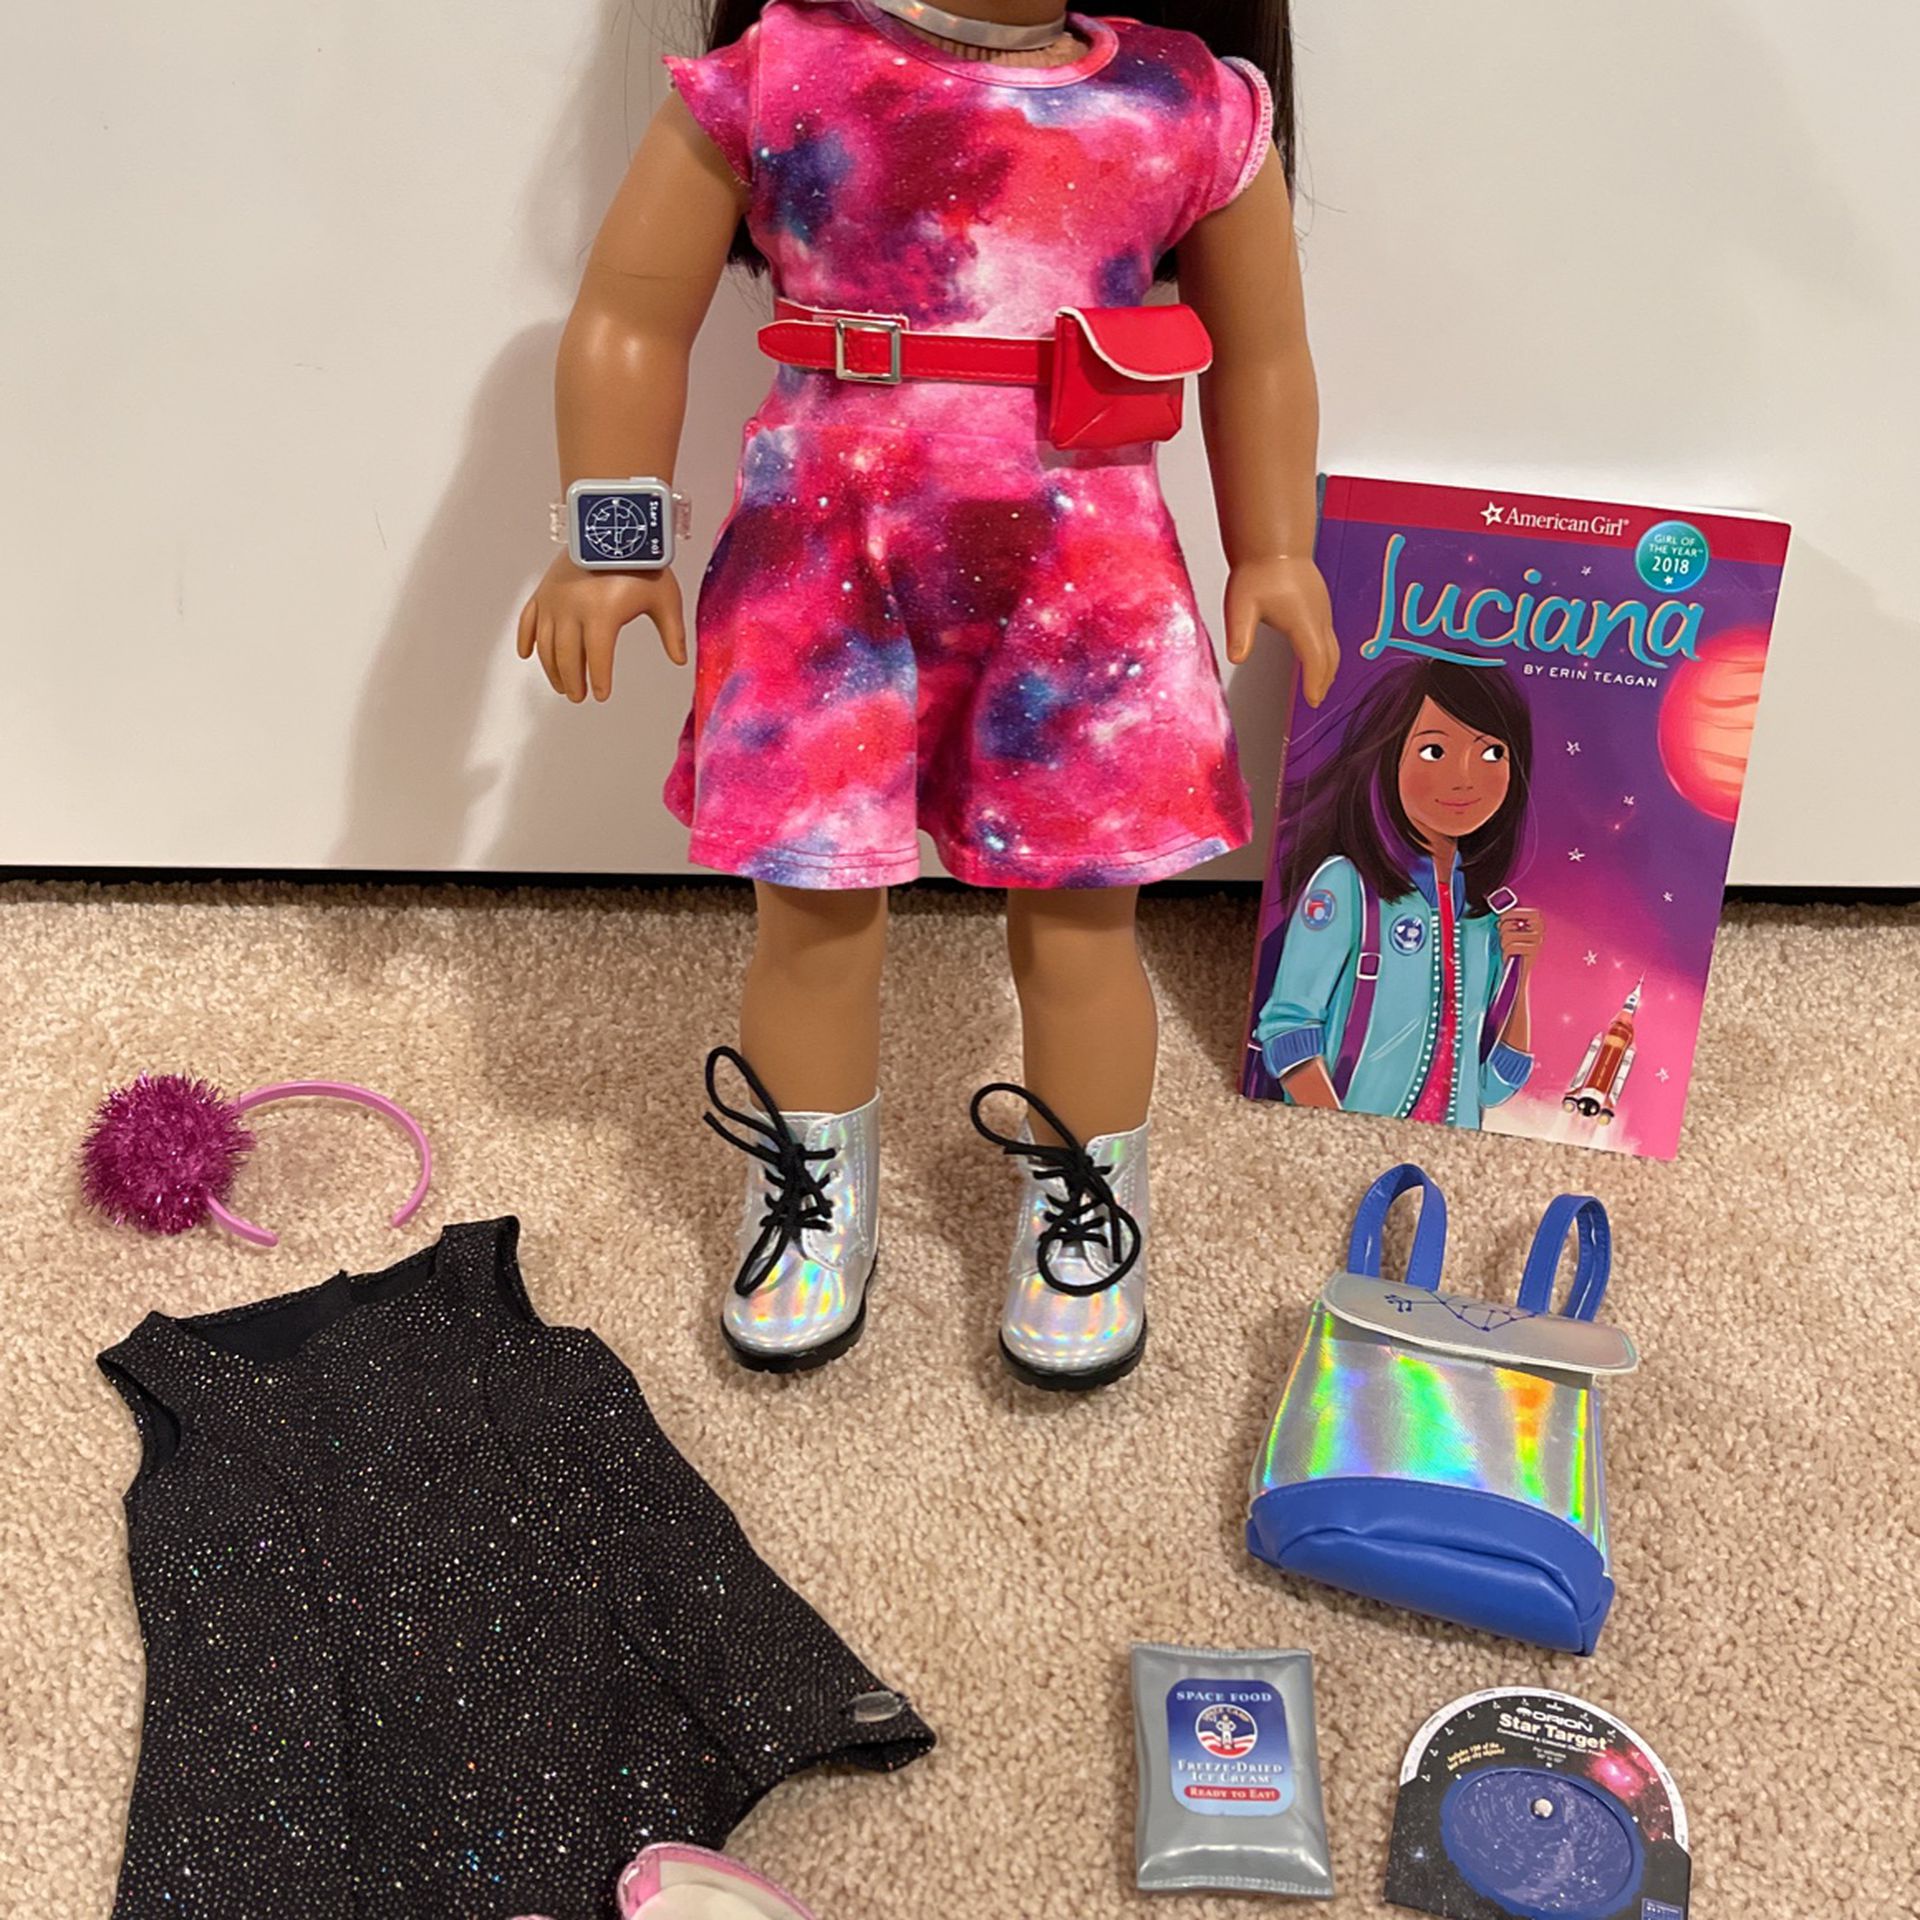 American Girl Luciana Doll And Outfit/Accessories 